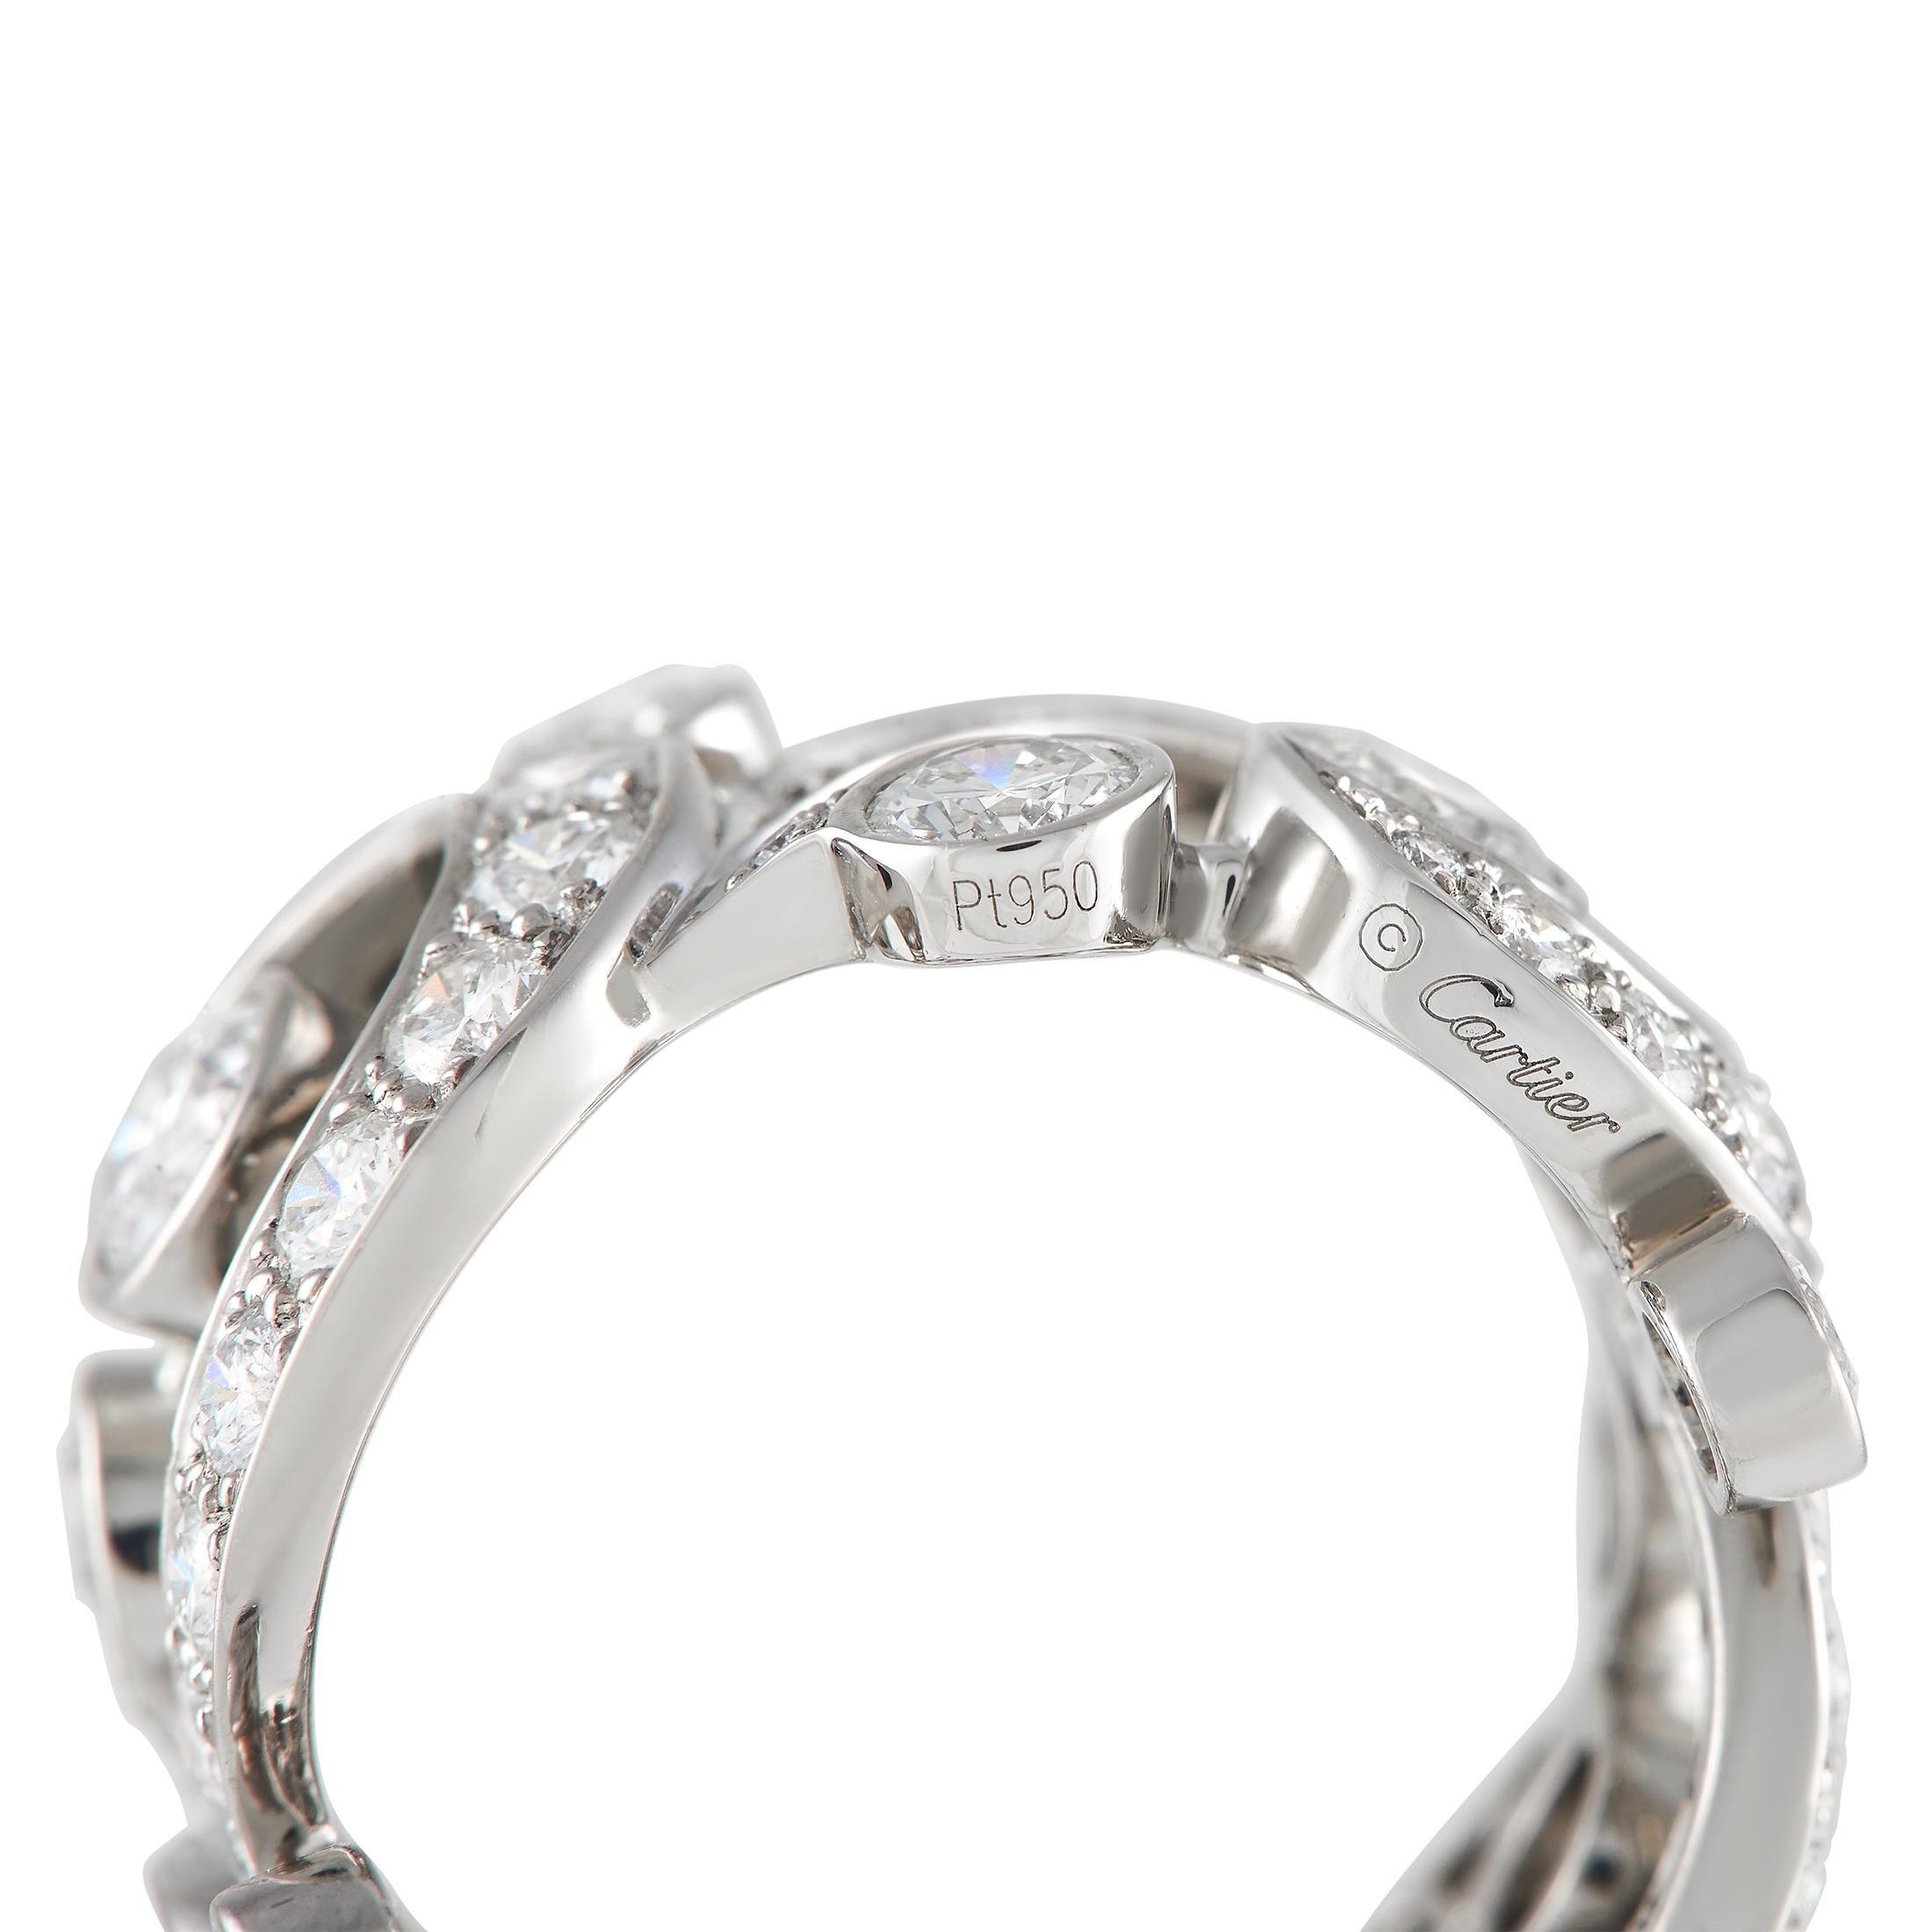 Cartier Boudoir Platinum 4.75 Carat Diamond Swirl Eternity Ring In Excellent Condition For Sale In Southampton, PA